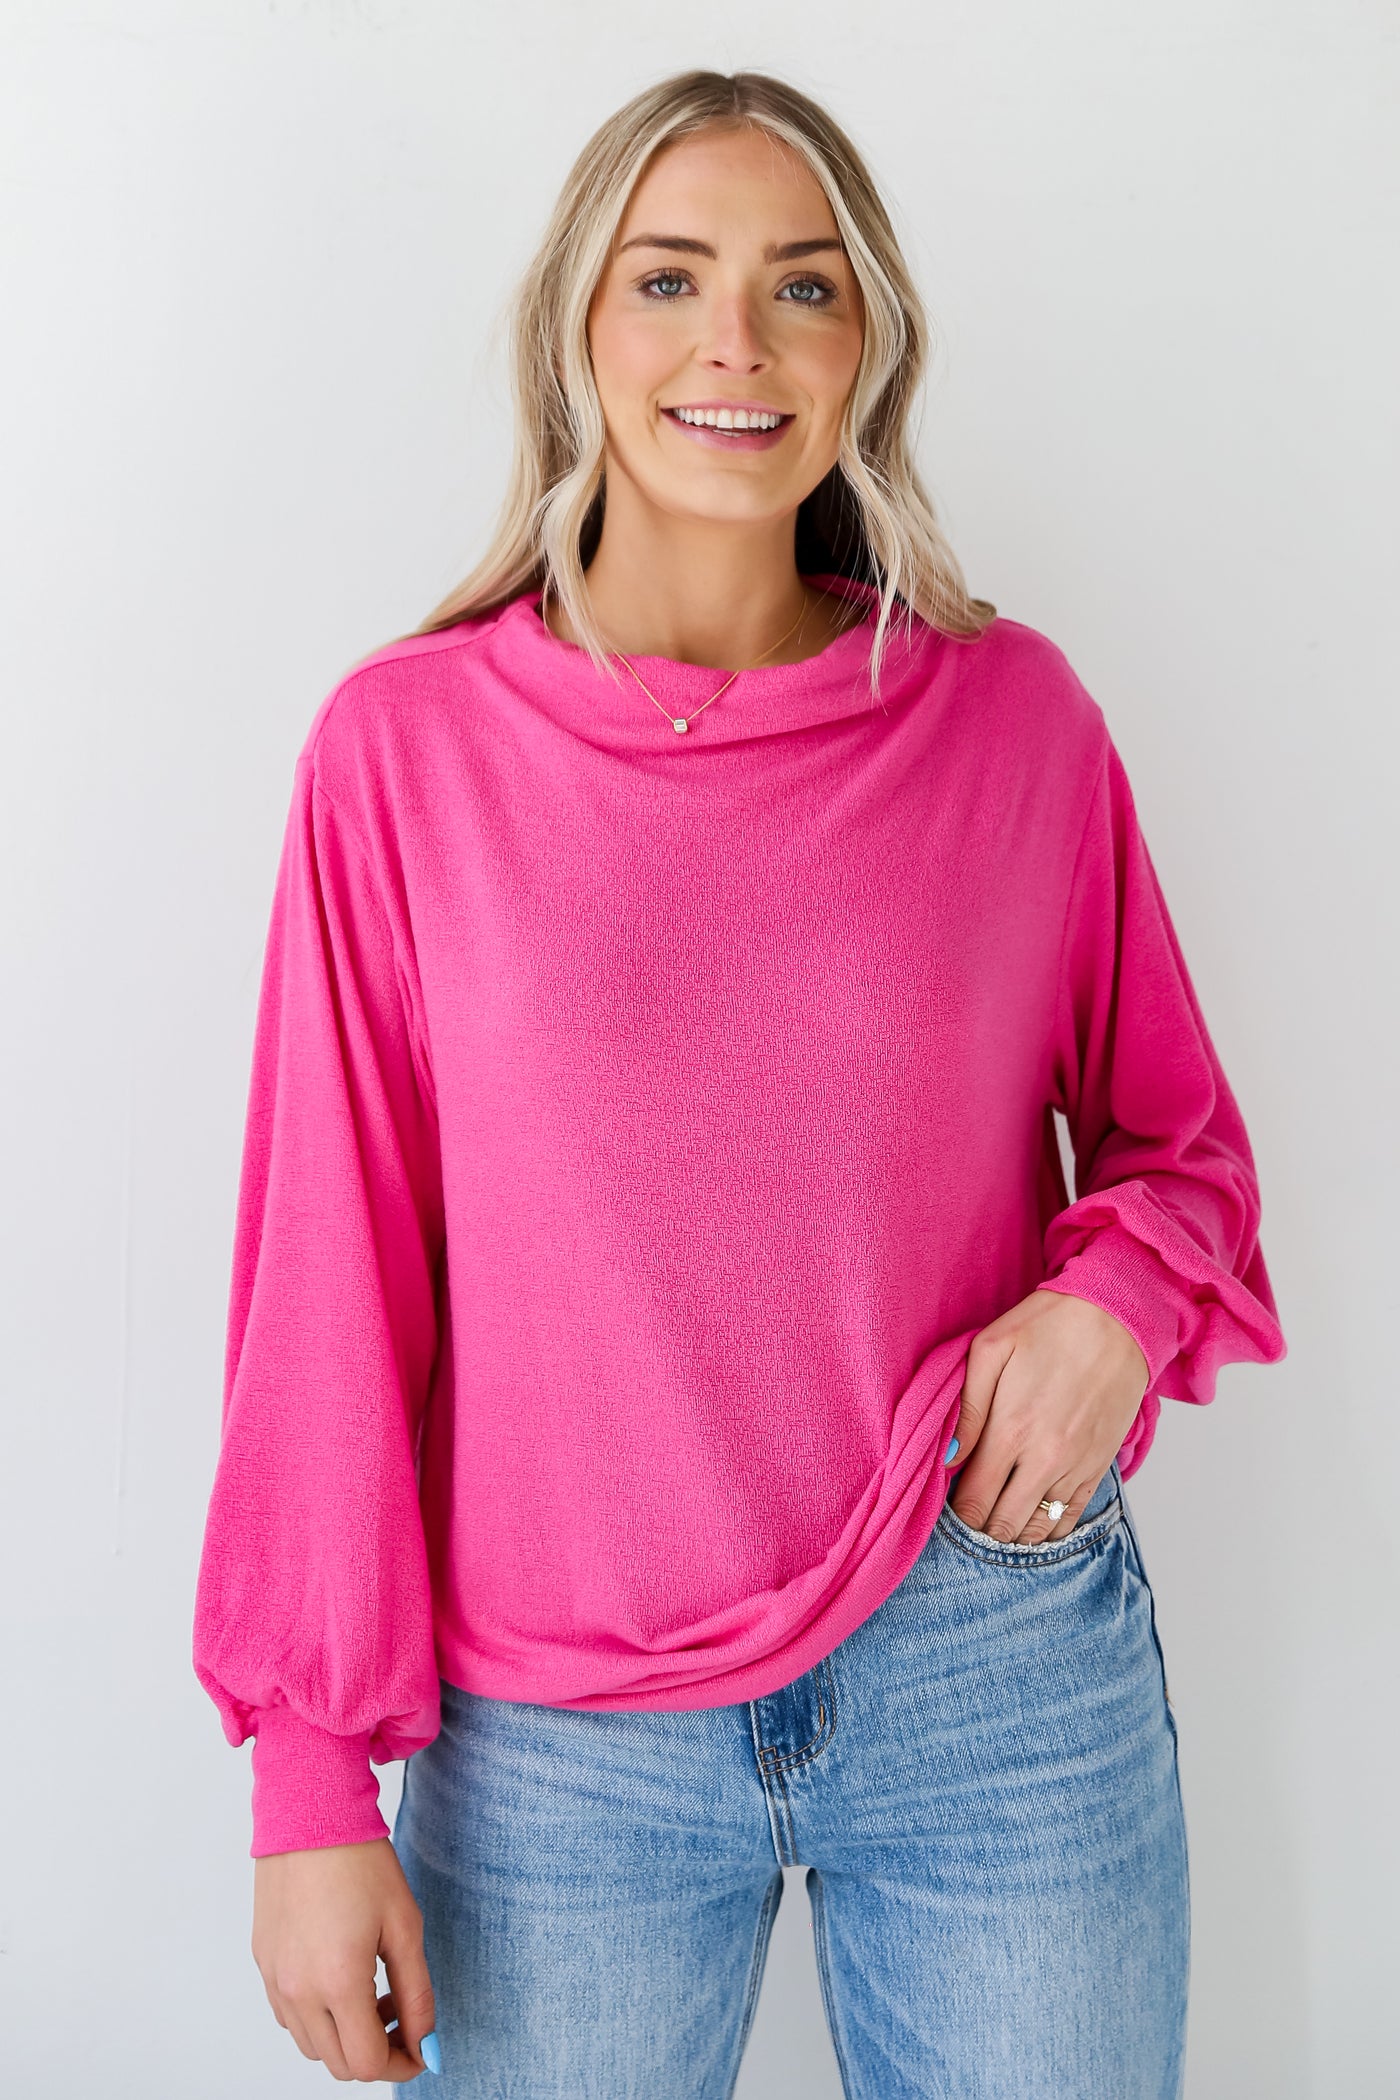 womens casual tops